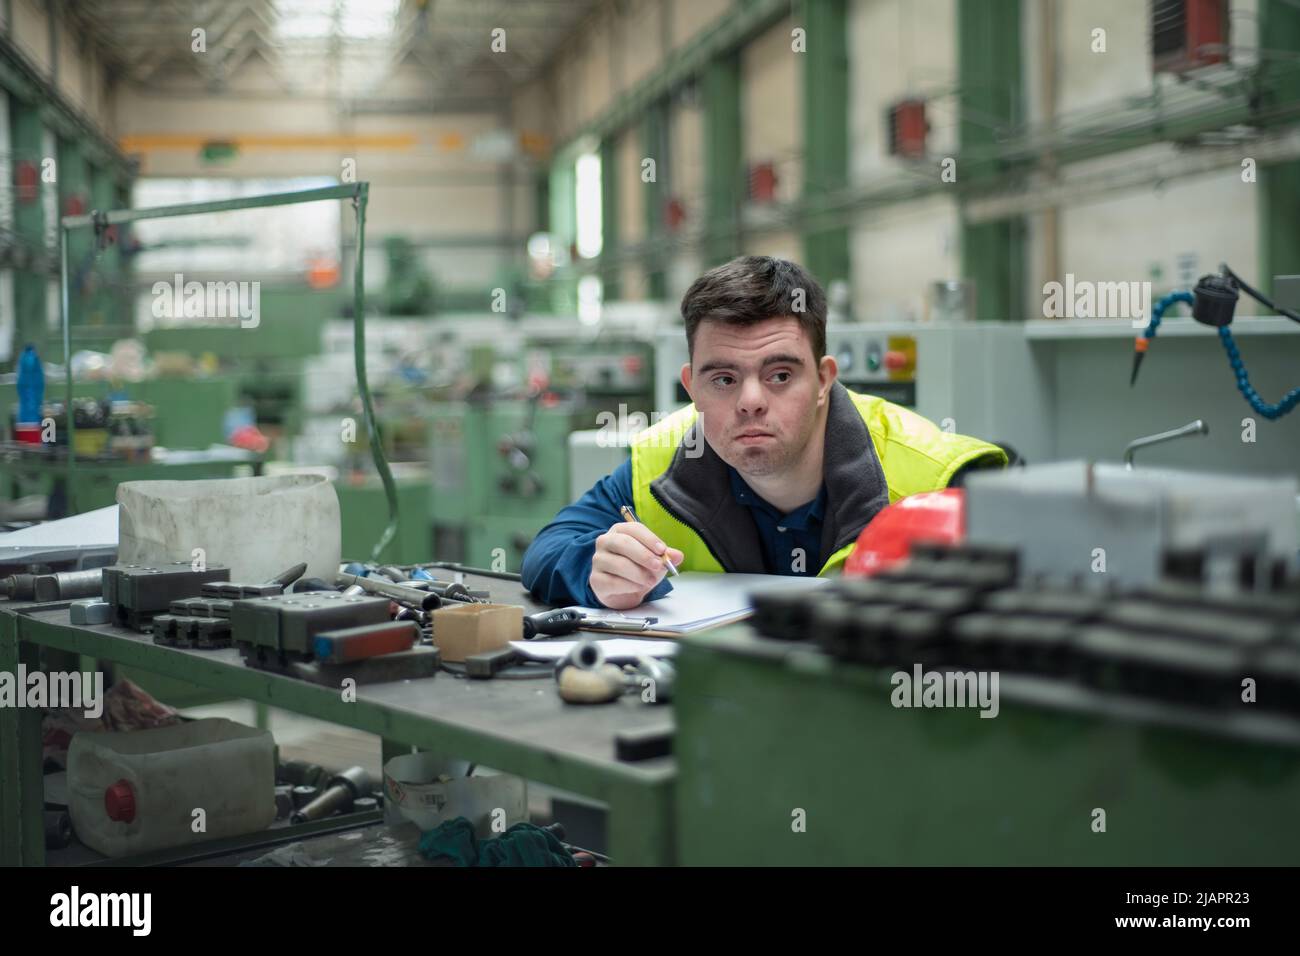 Young man with Down syndrome working in industrial factory, social integration concept. Stock Photo